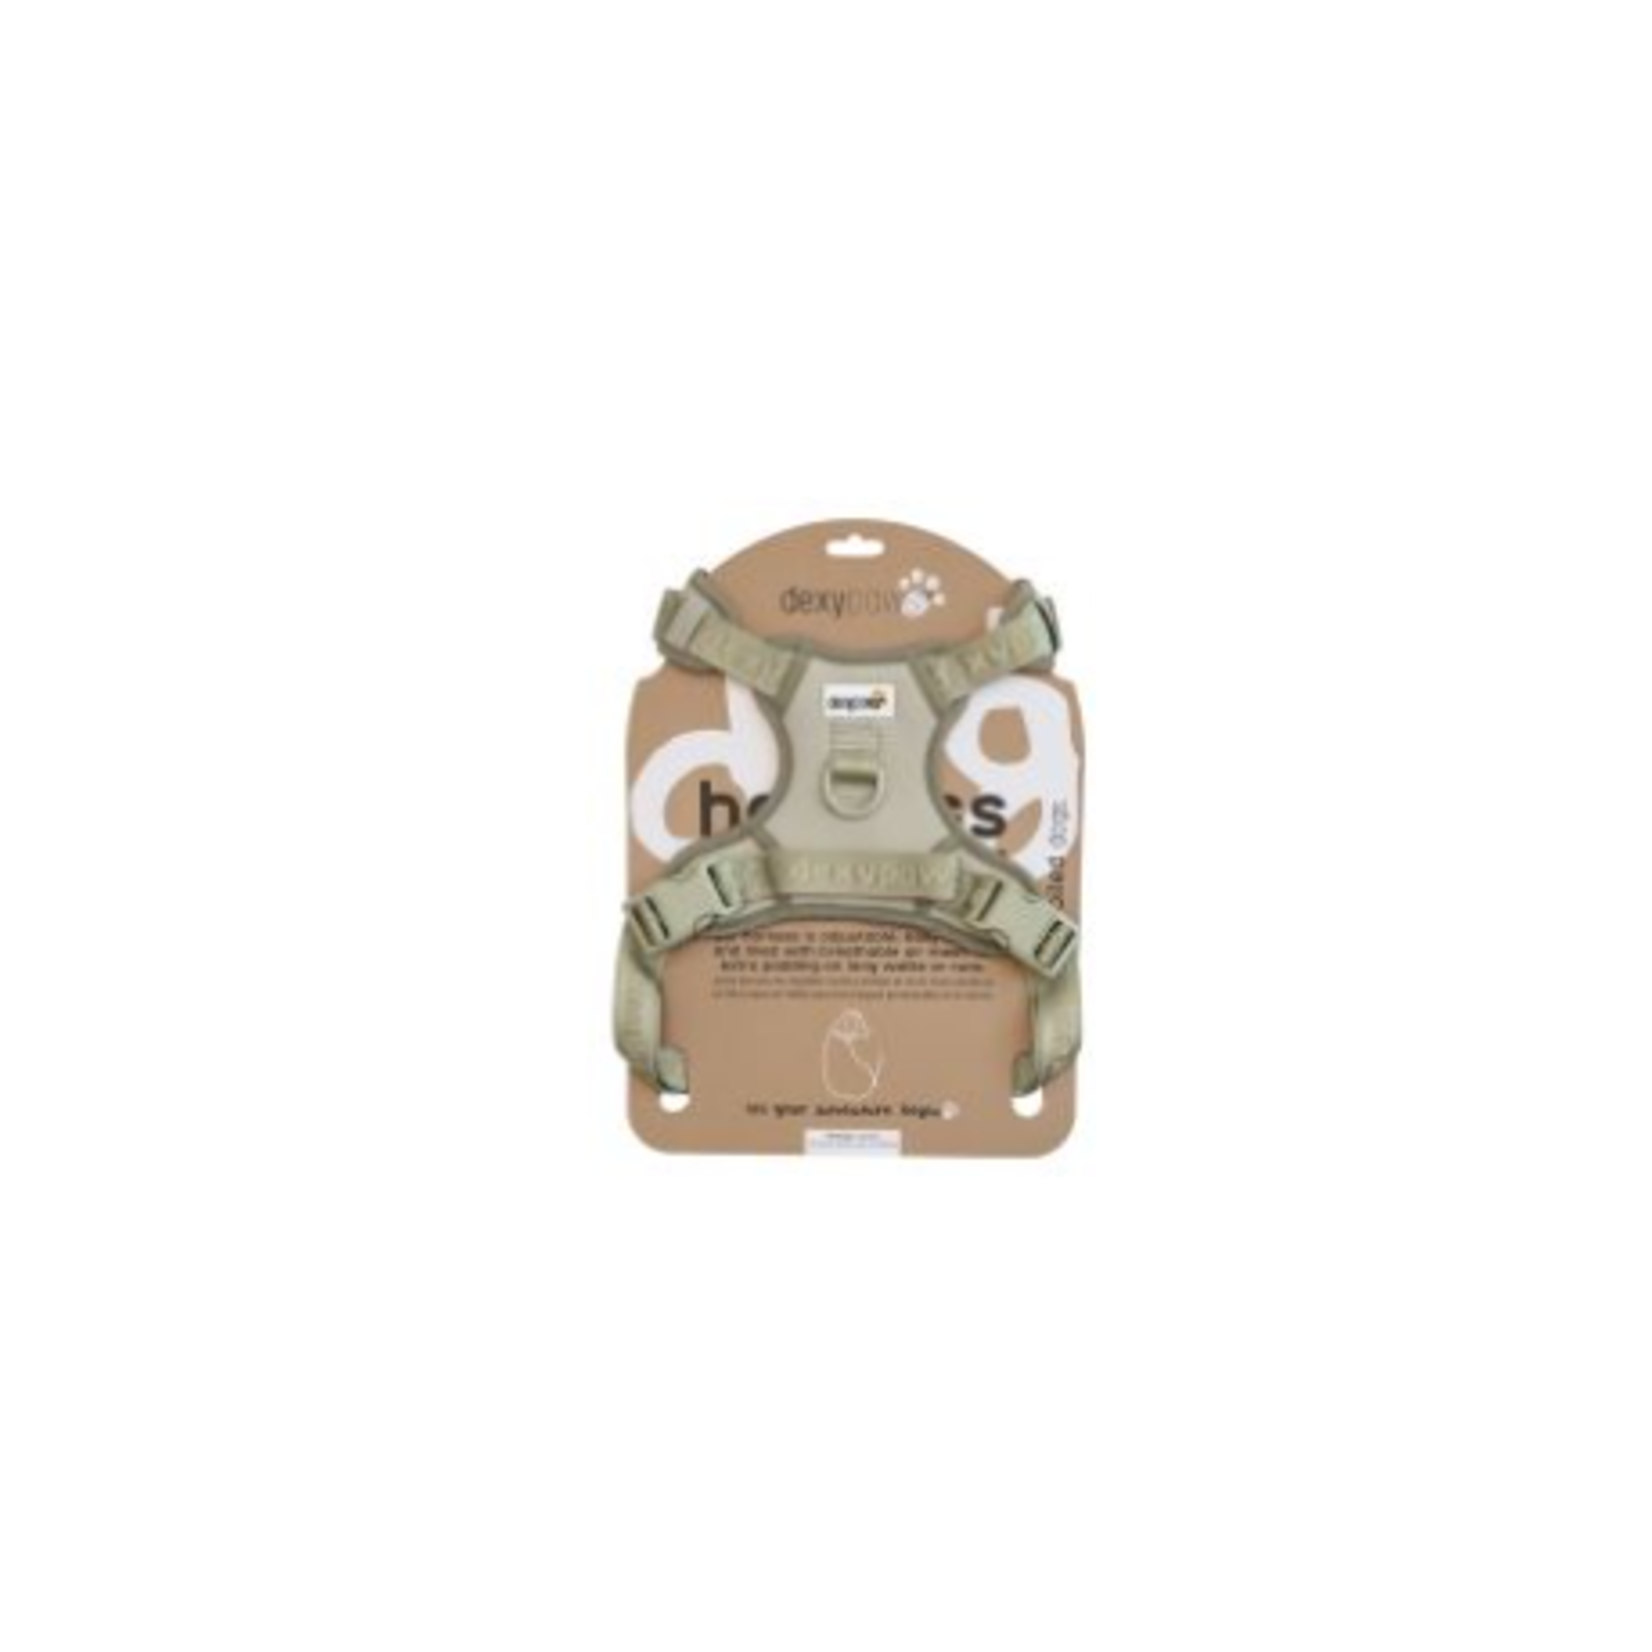 Dexypaws No-Pull Dog Harness - Sage Green